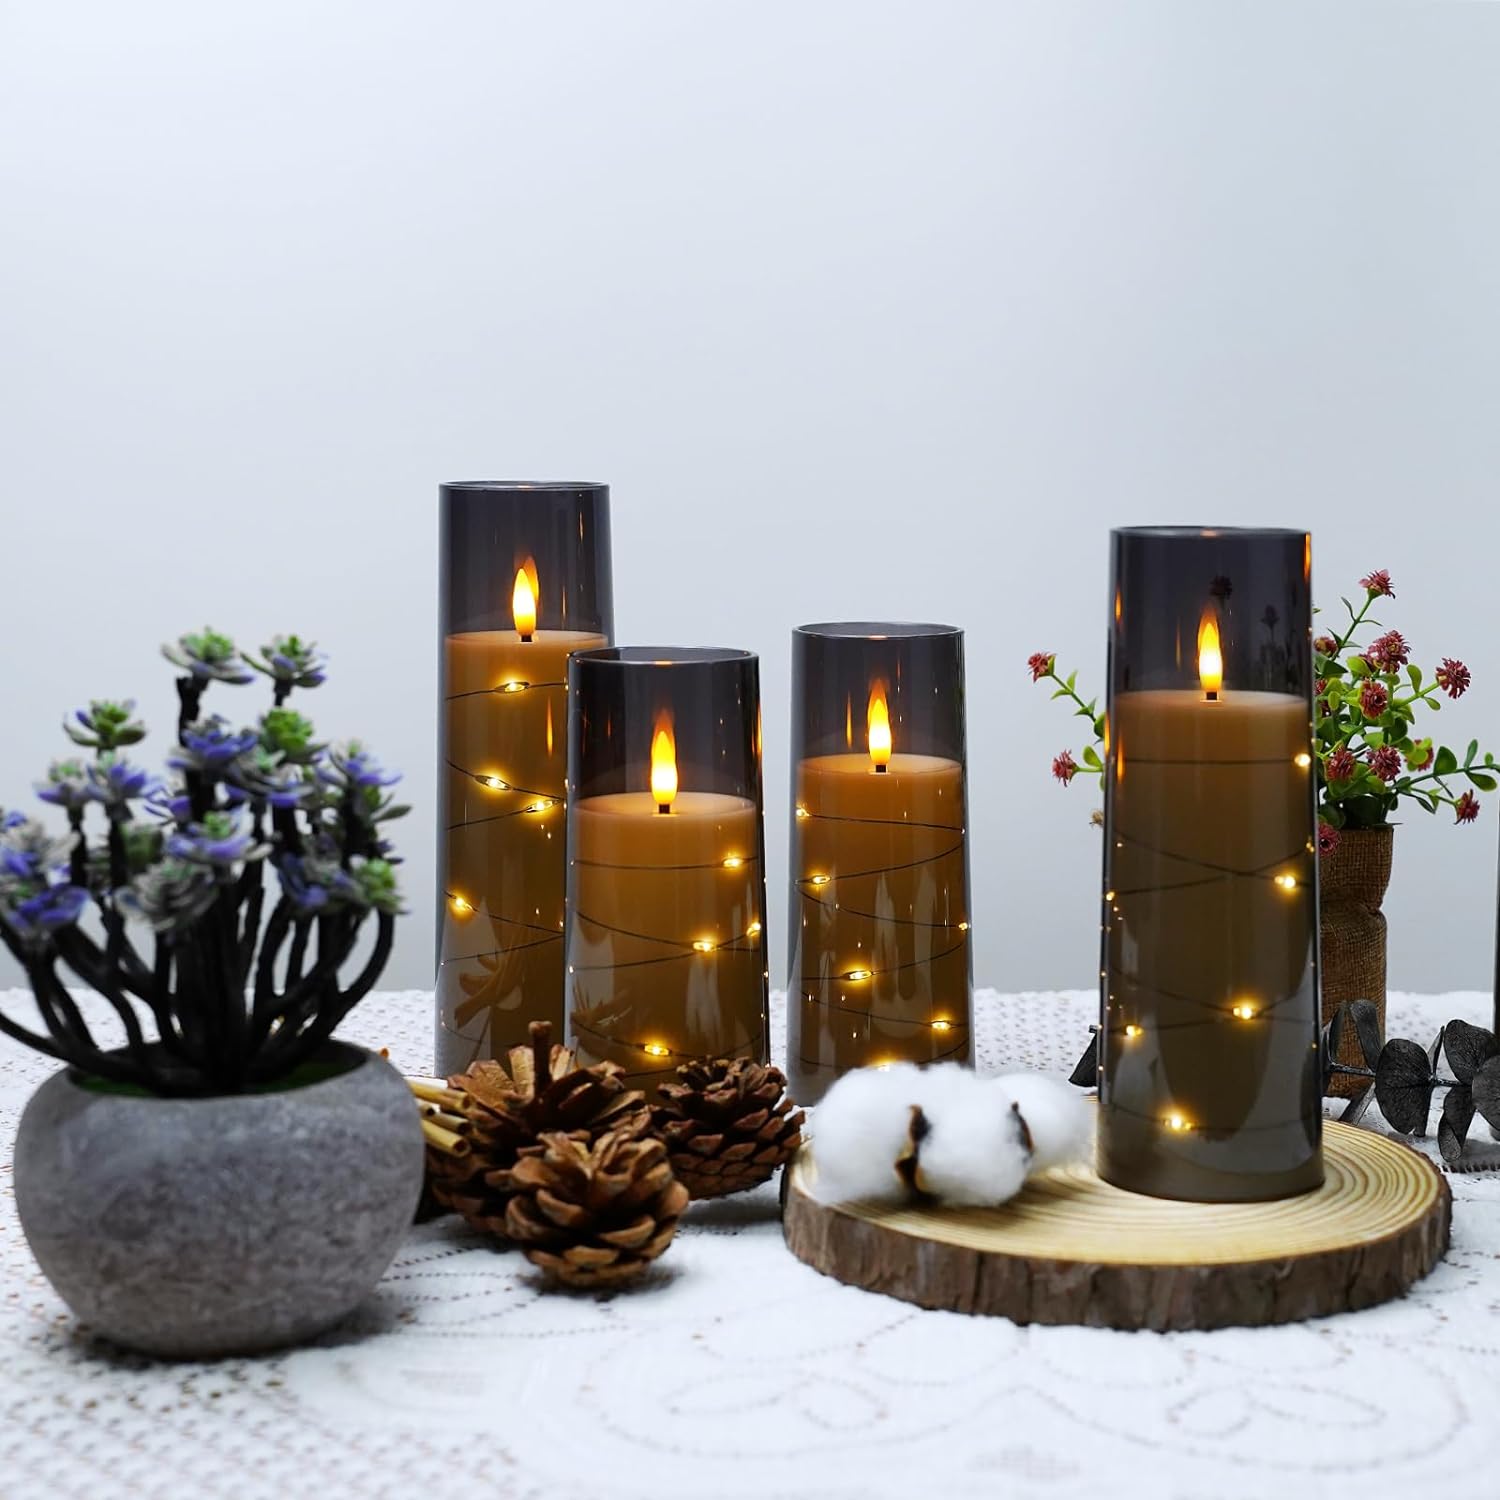 kakoya Flameless LED Candles with Timer Set of 5 Flickering Votive Candles for Romantic Ambiance and Wedding Ceremonies - Durable Acrylic Shell, with Embedded Star String，Battery Operated（Grey）